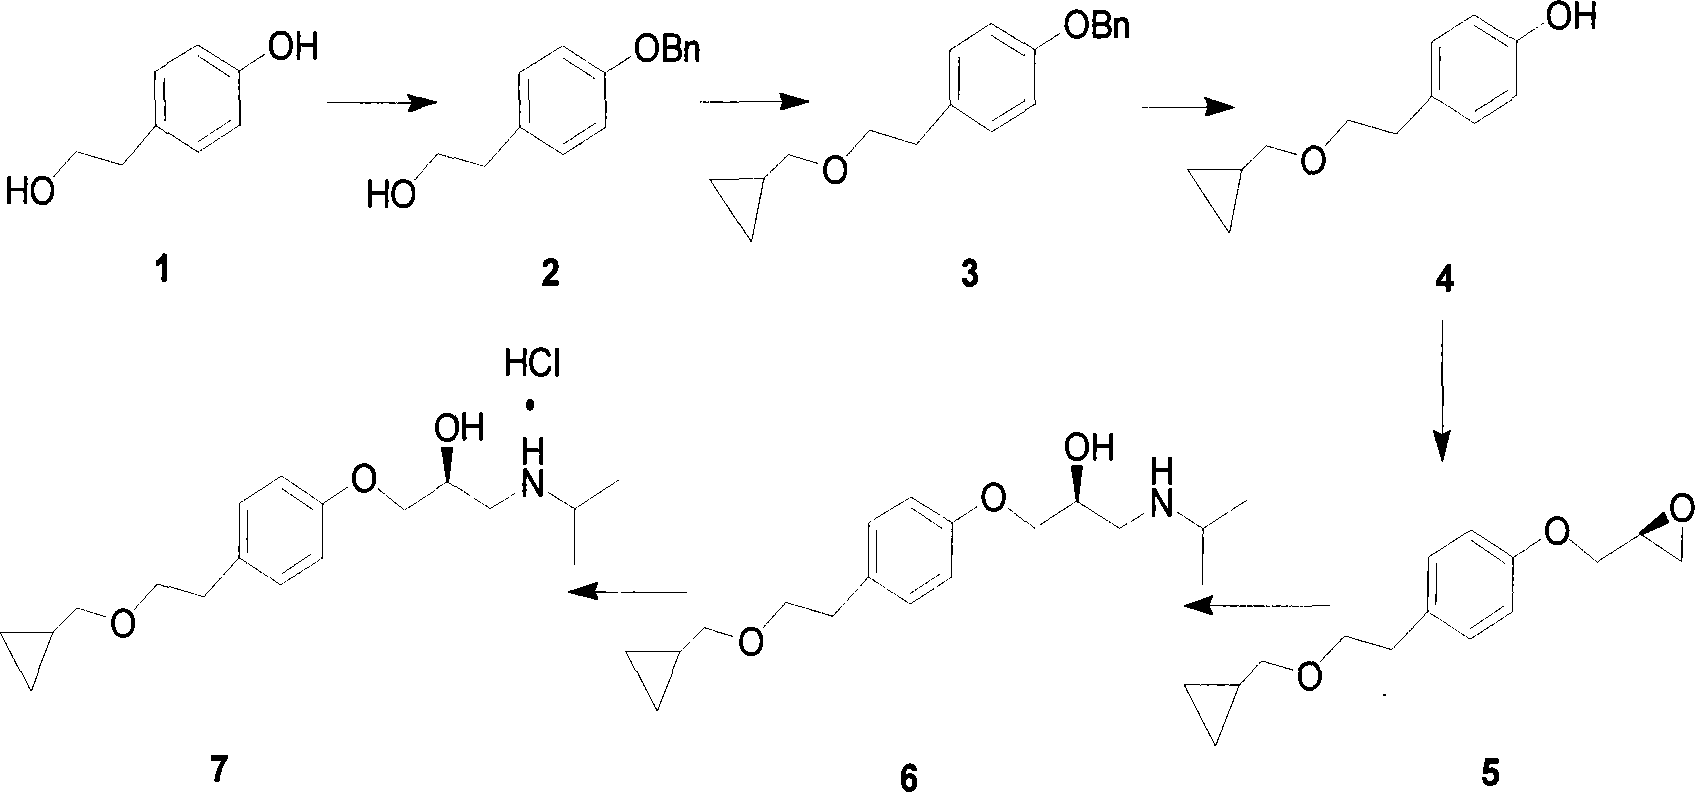 Technique for synthesizing levorotatory betaxolol hydrochloride